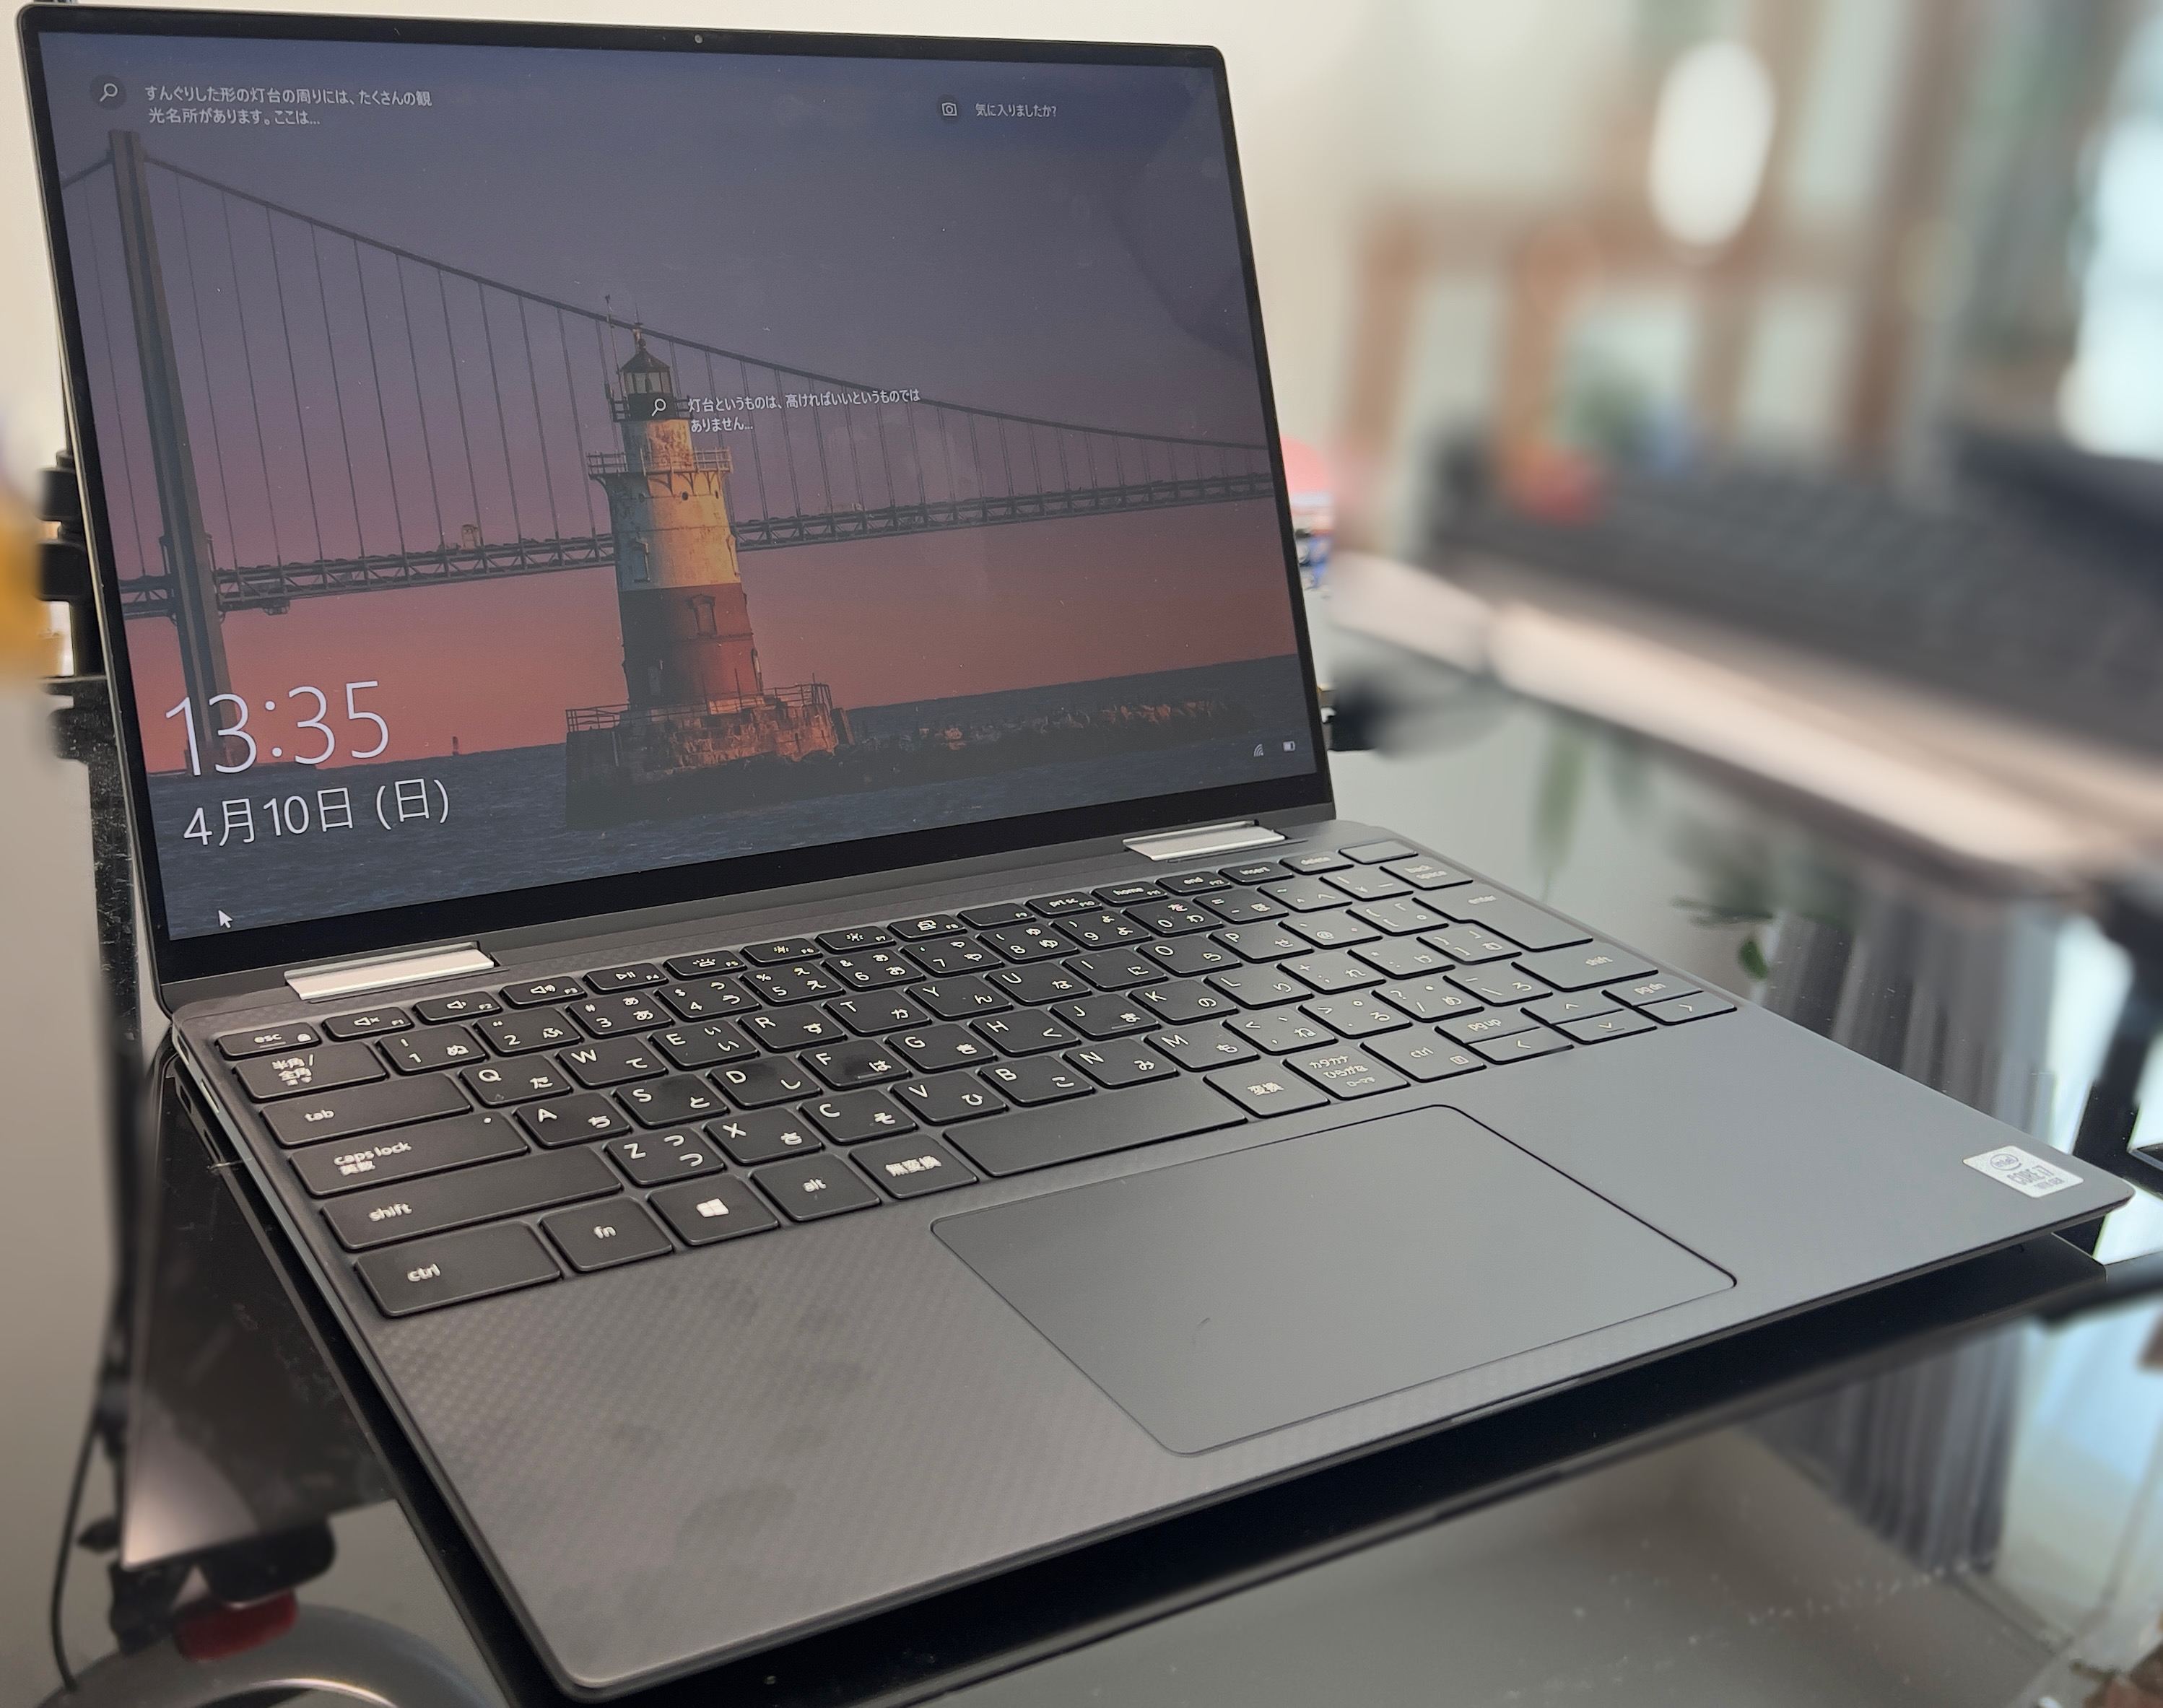 XPS 13 2-in-1 (7390)